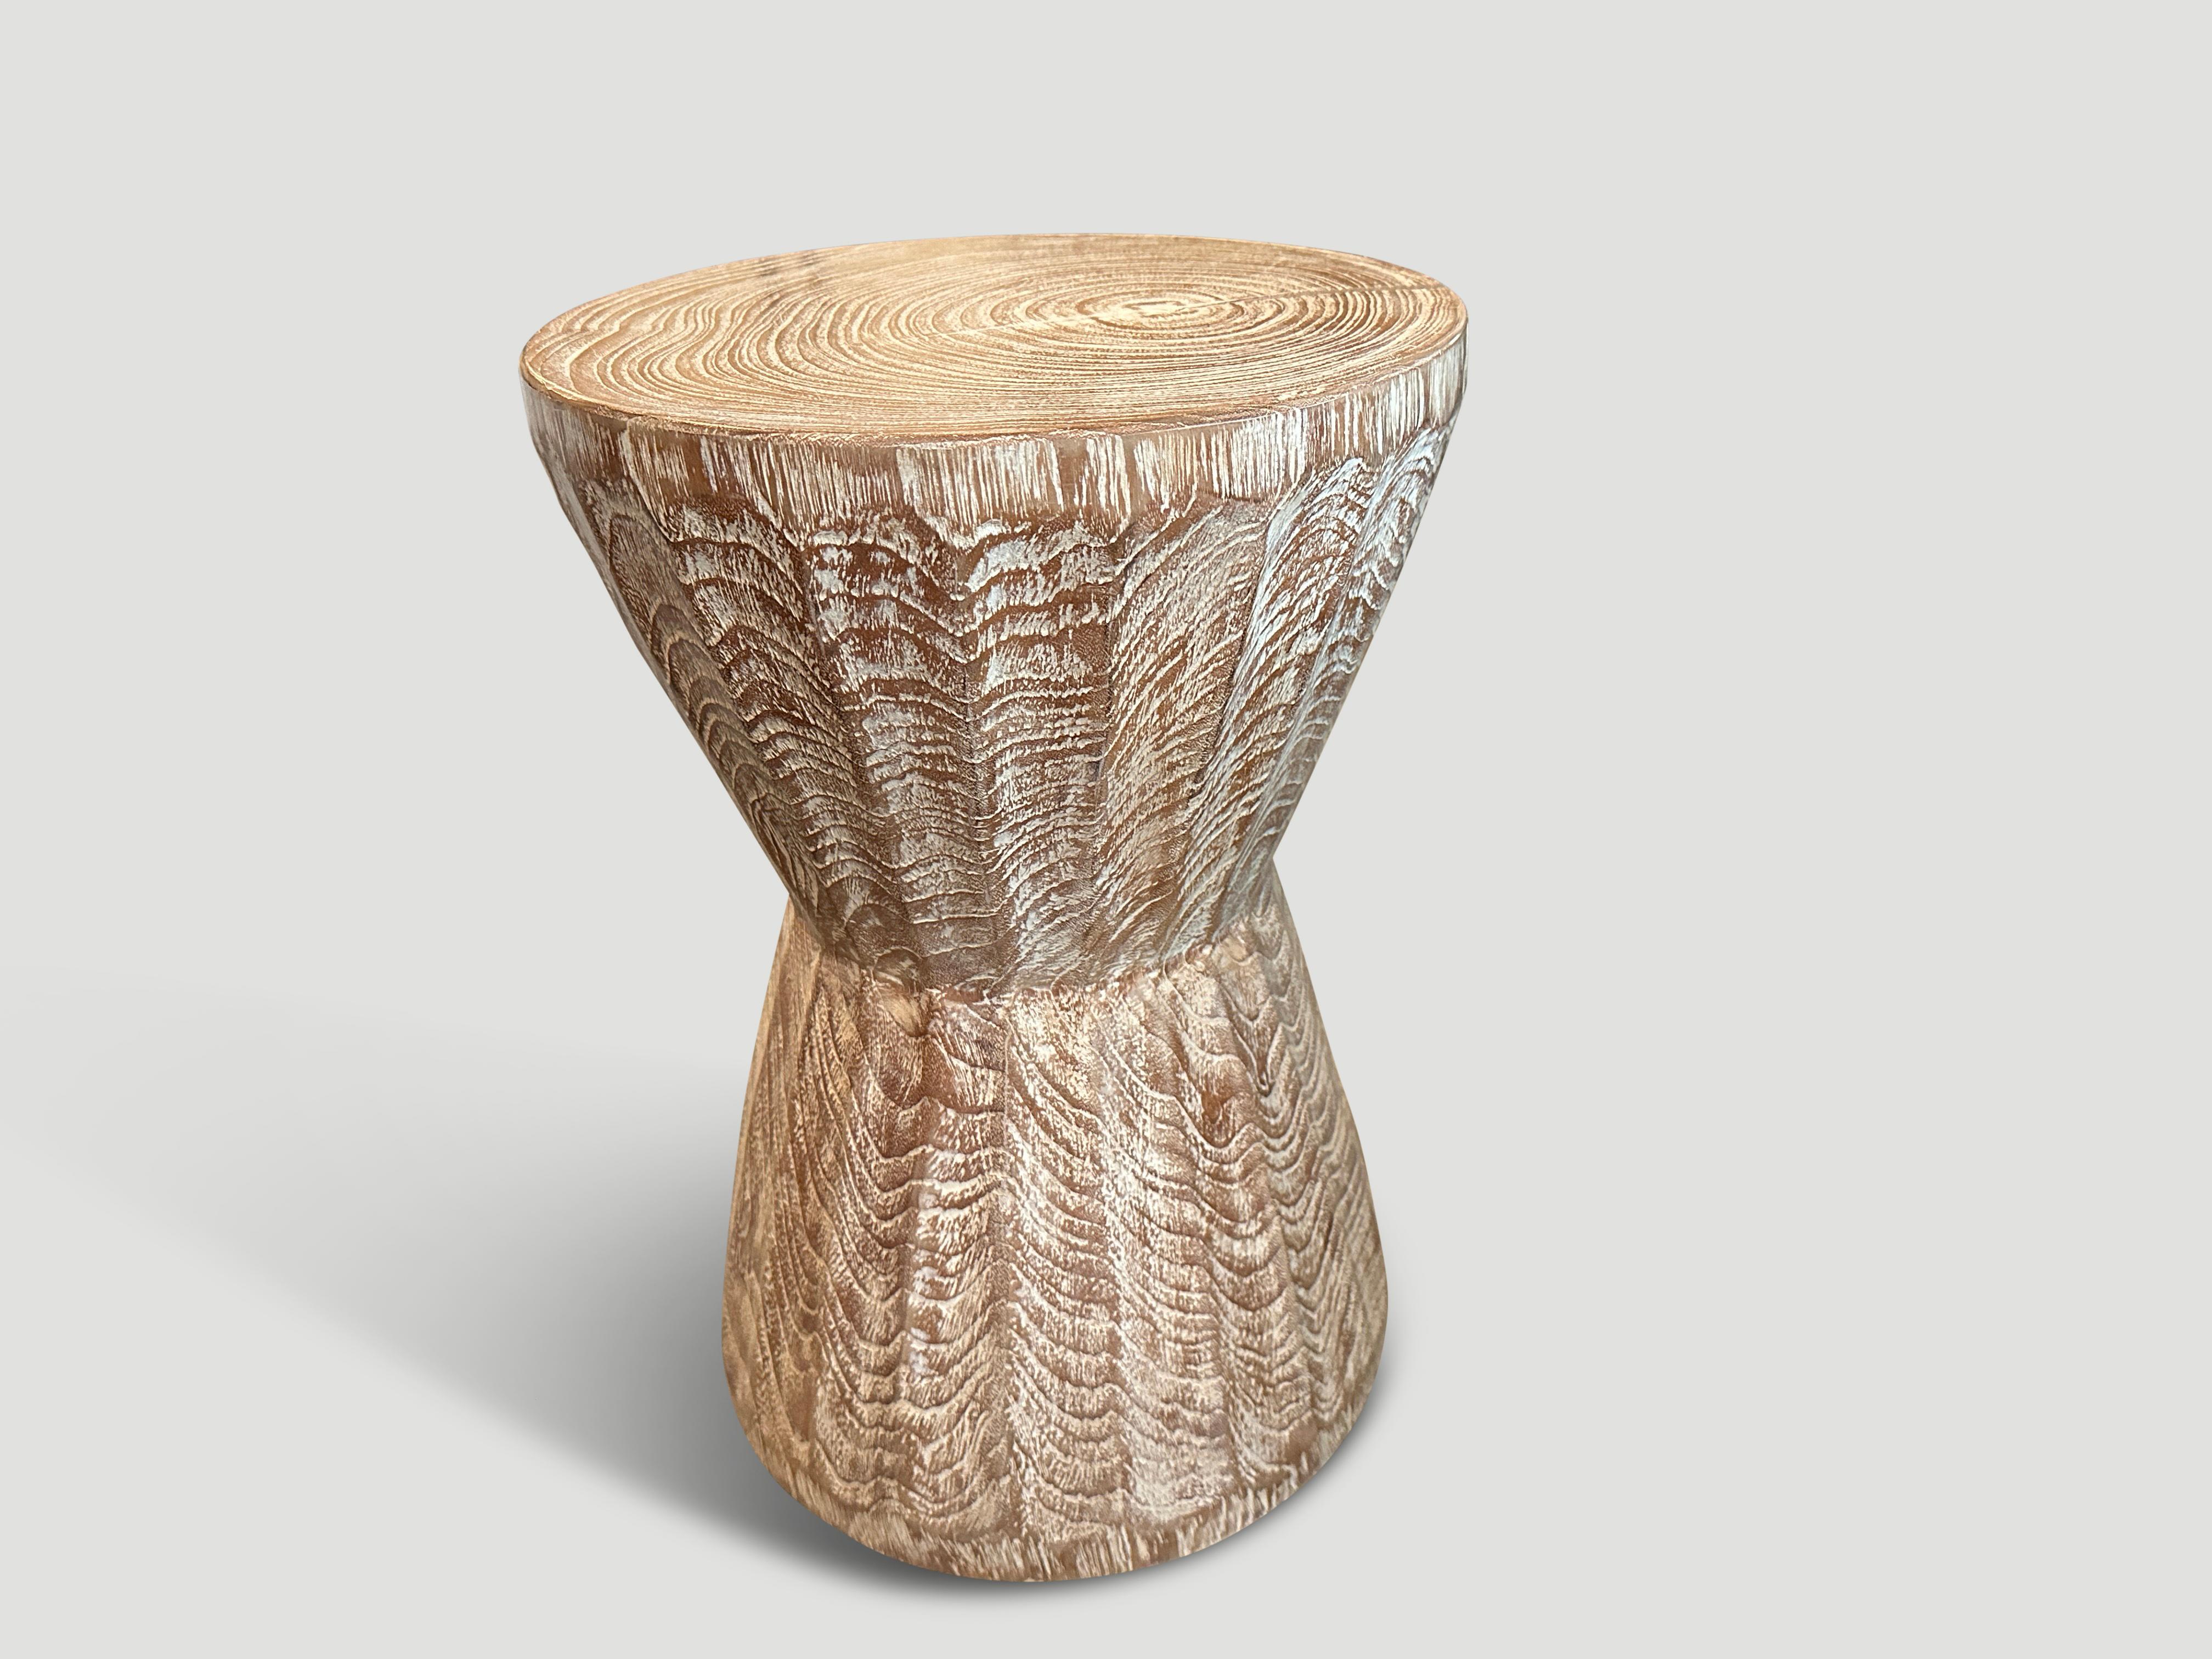 Hand carved bevelled teak side table or stool. Celebrating the cracks and crevices found in reclaimed teak wood. We added a ceruse finish revealing the beautiful wood grain. The final image produced for 1Hotel Miami Beach. Custom stains available.